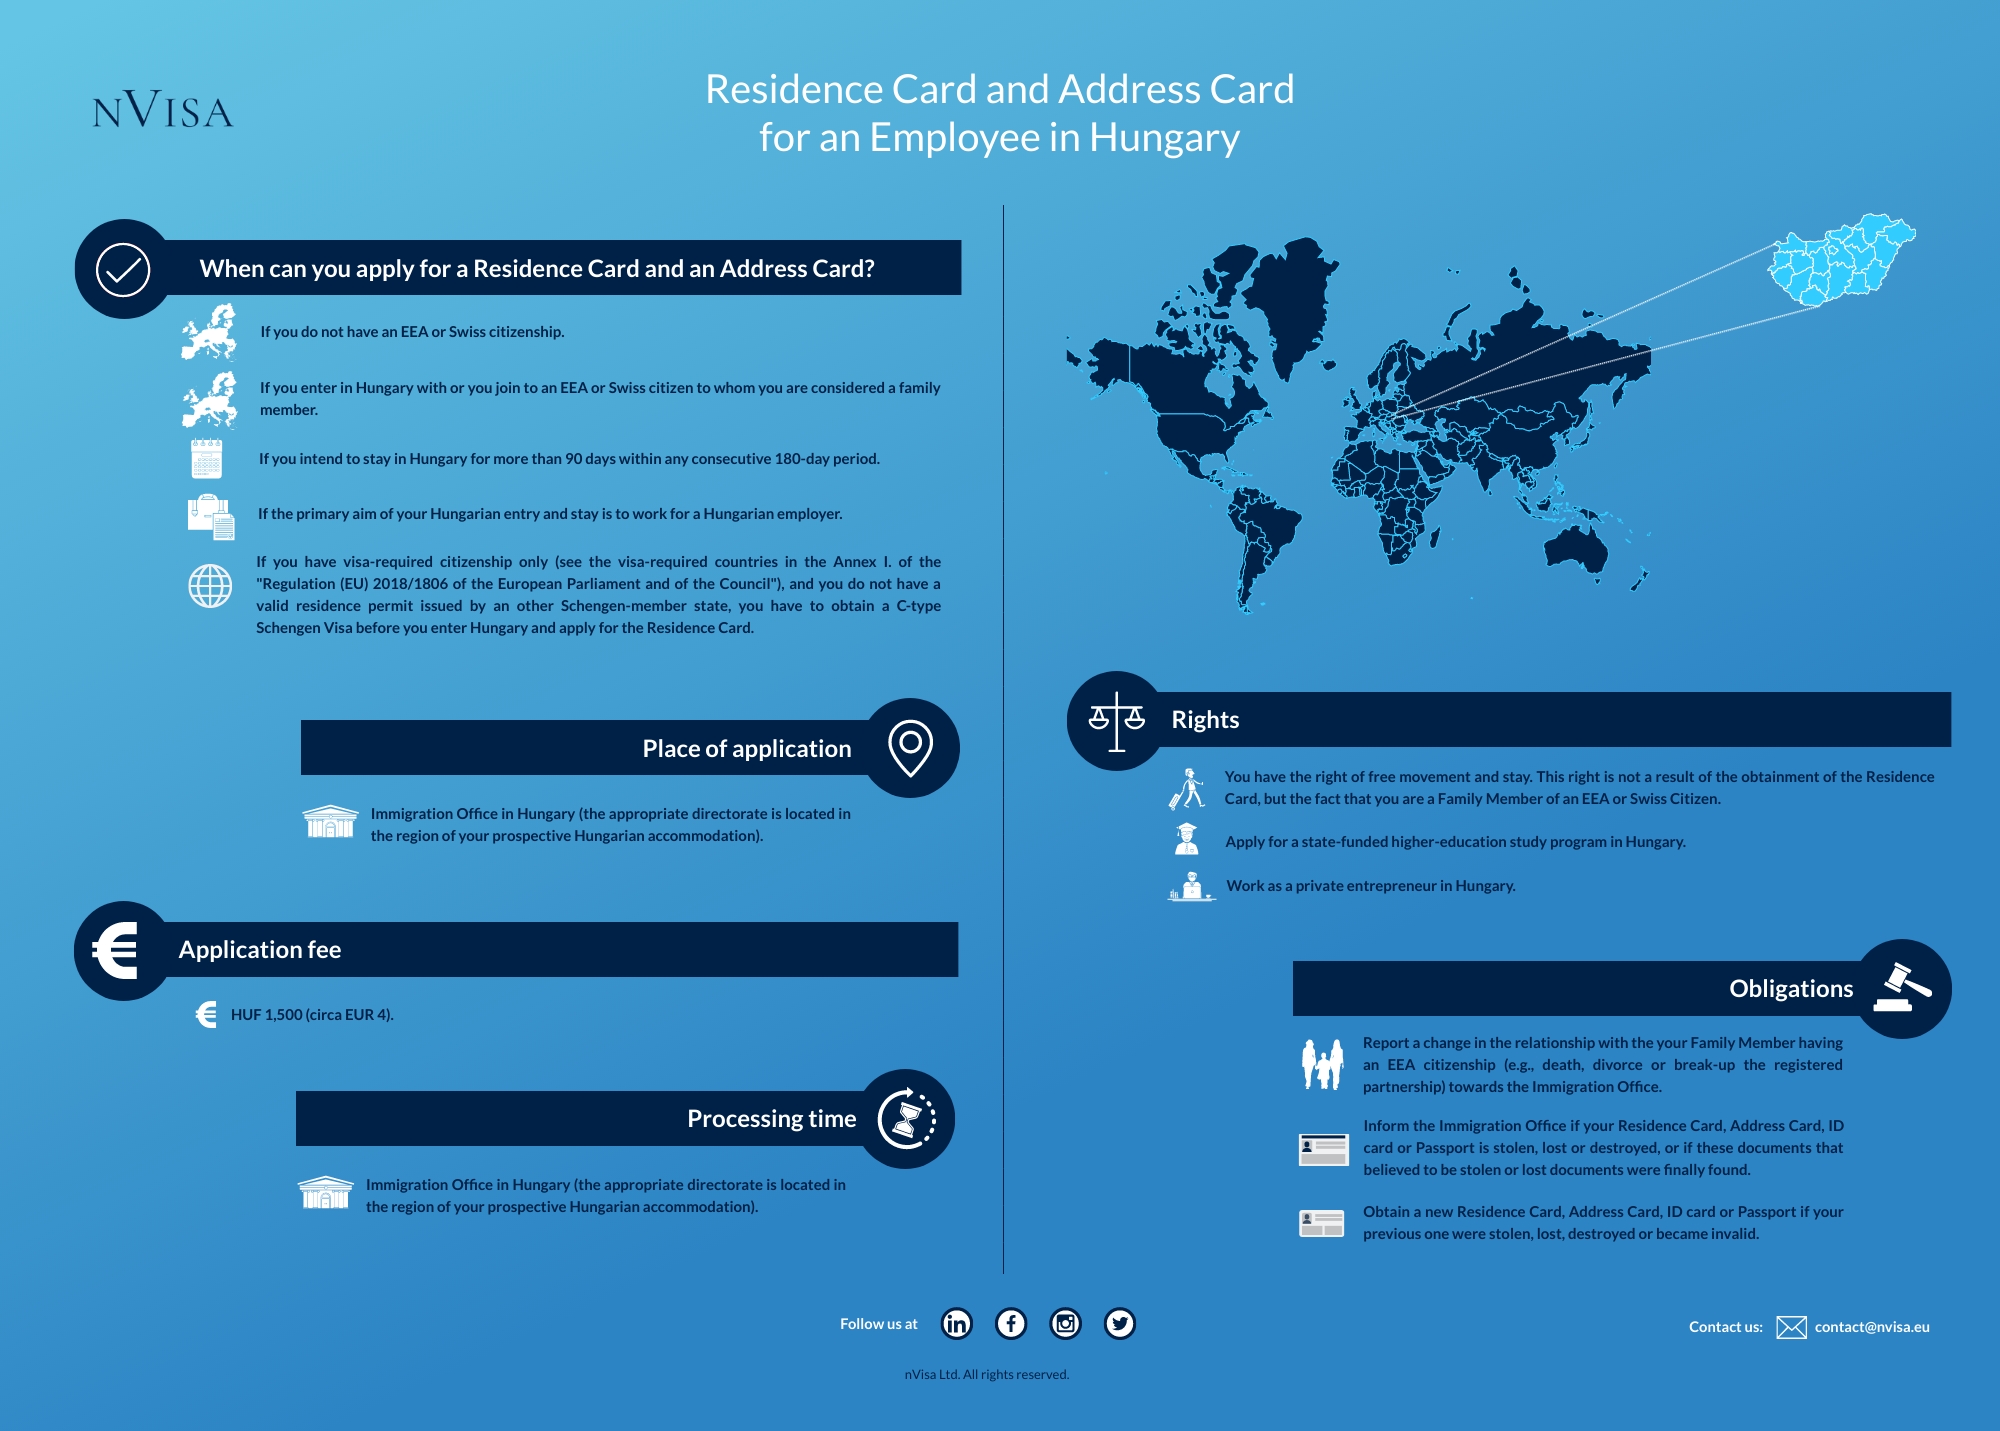 Infographic about immigration requirements and the details of obtaining a Hungarian Residence Card and Address Card for a third-country national Employee, who is a Family Member of an EEA Citizen.